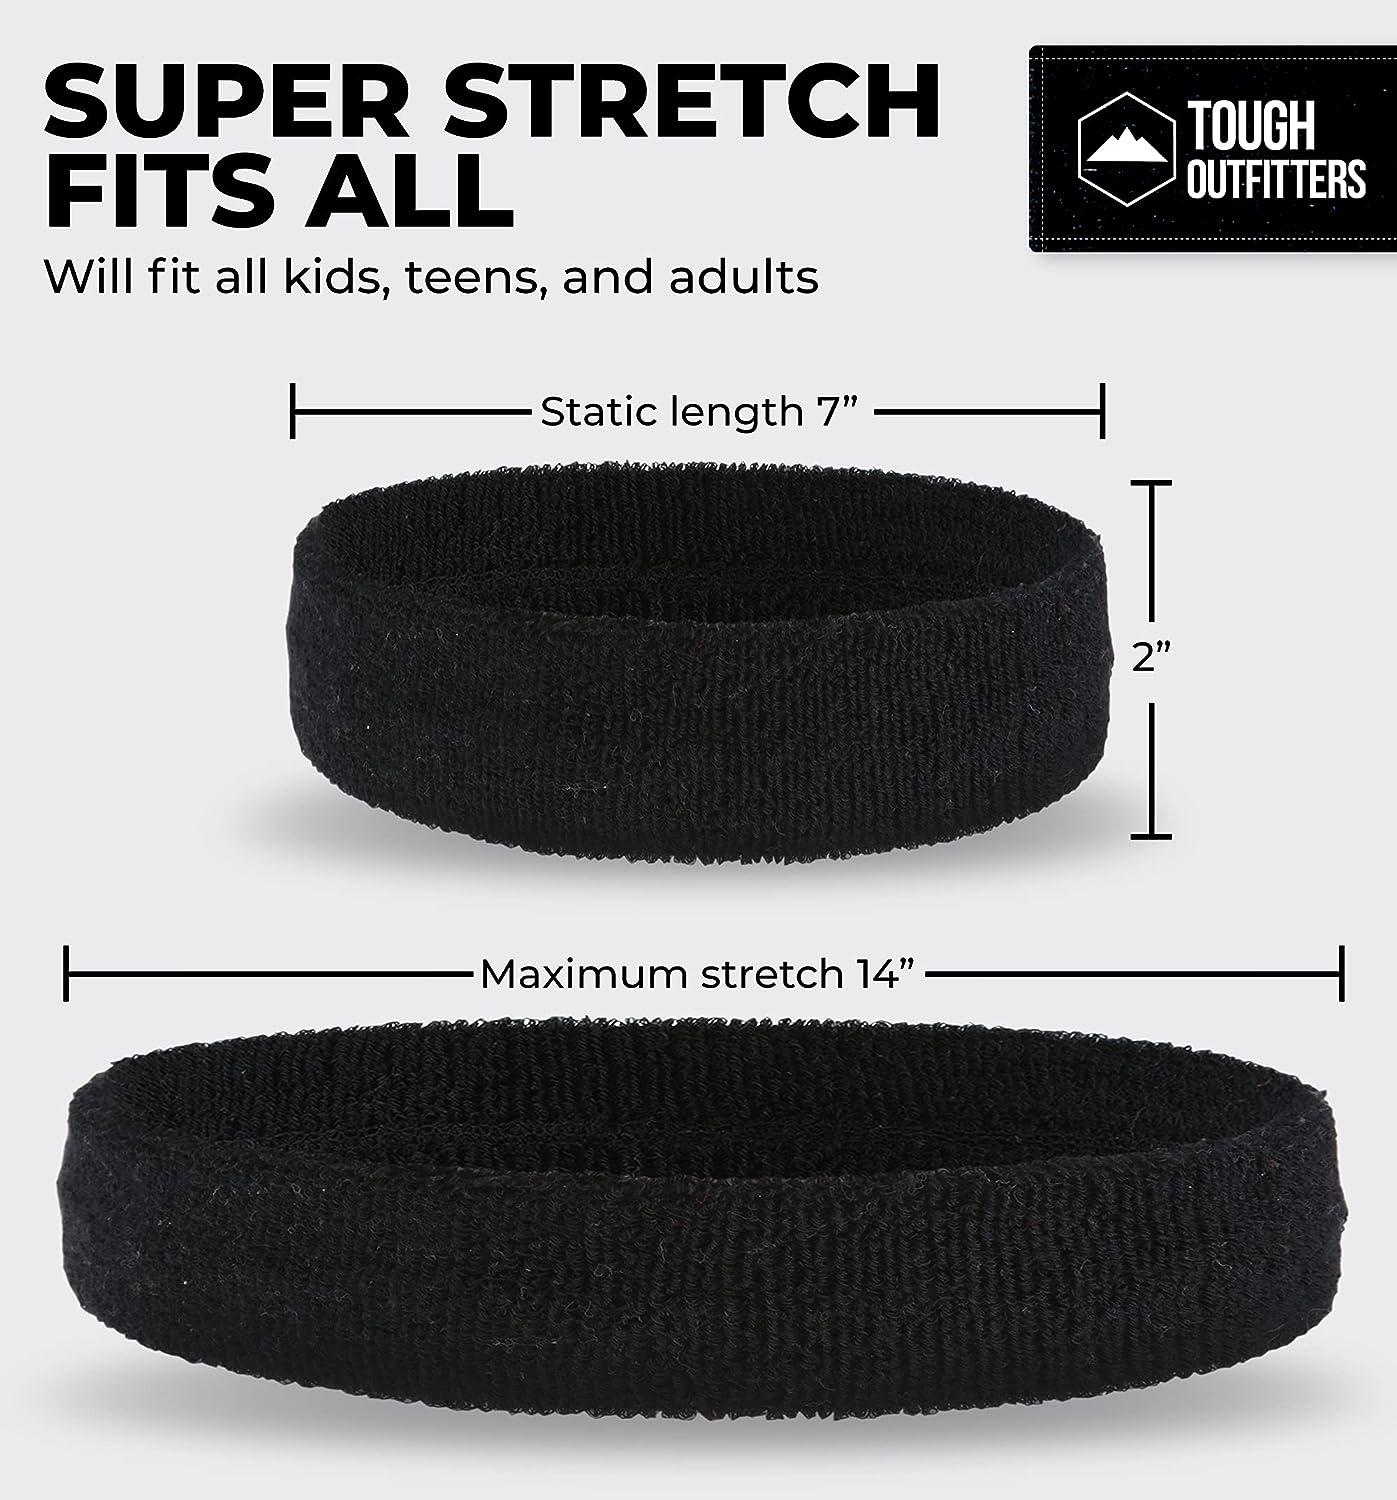 Sweatbands Set - Head & Wrist Sweat Bands - Terry Cloth Sweatbands for  Tennis, Working Out, Sports, Basketball, Gym, Exercise - Headband &  Wristbands for Men & Women - Stretchy & Soft Cotton Headbands - Black